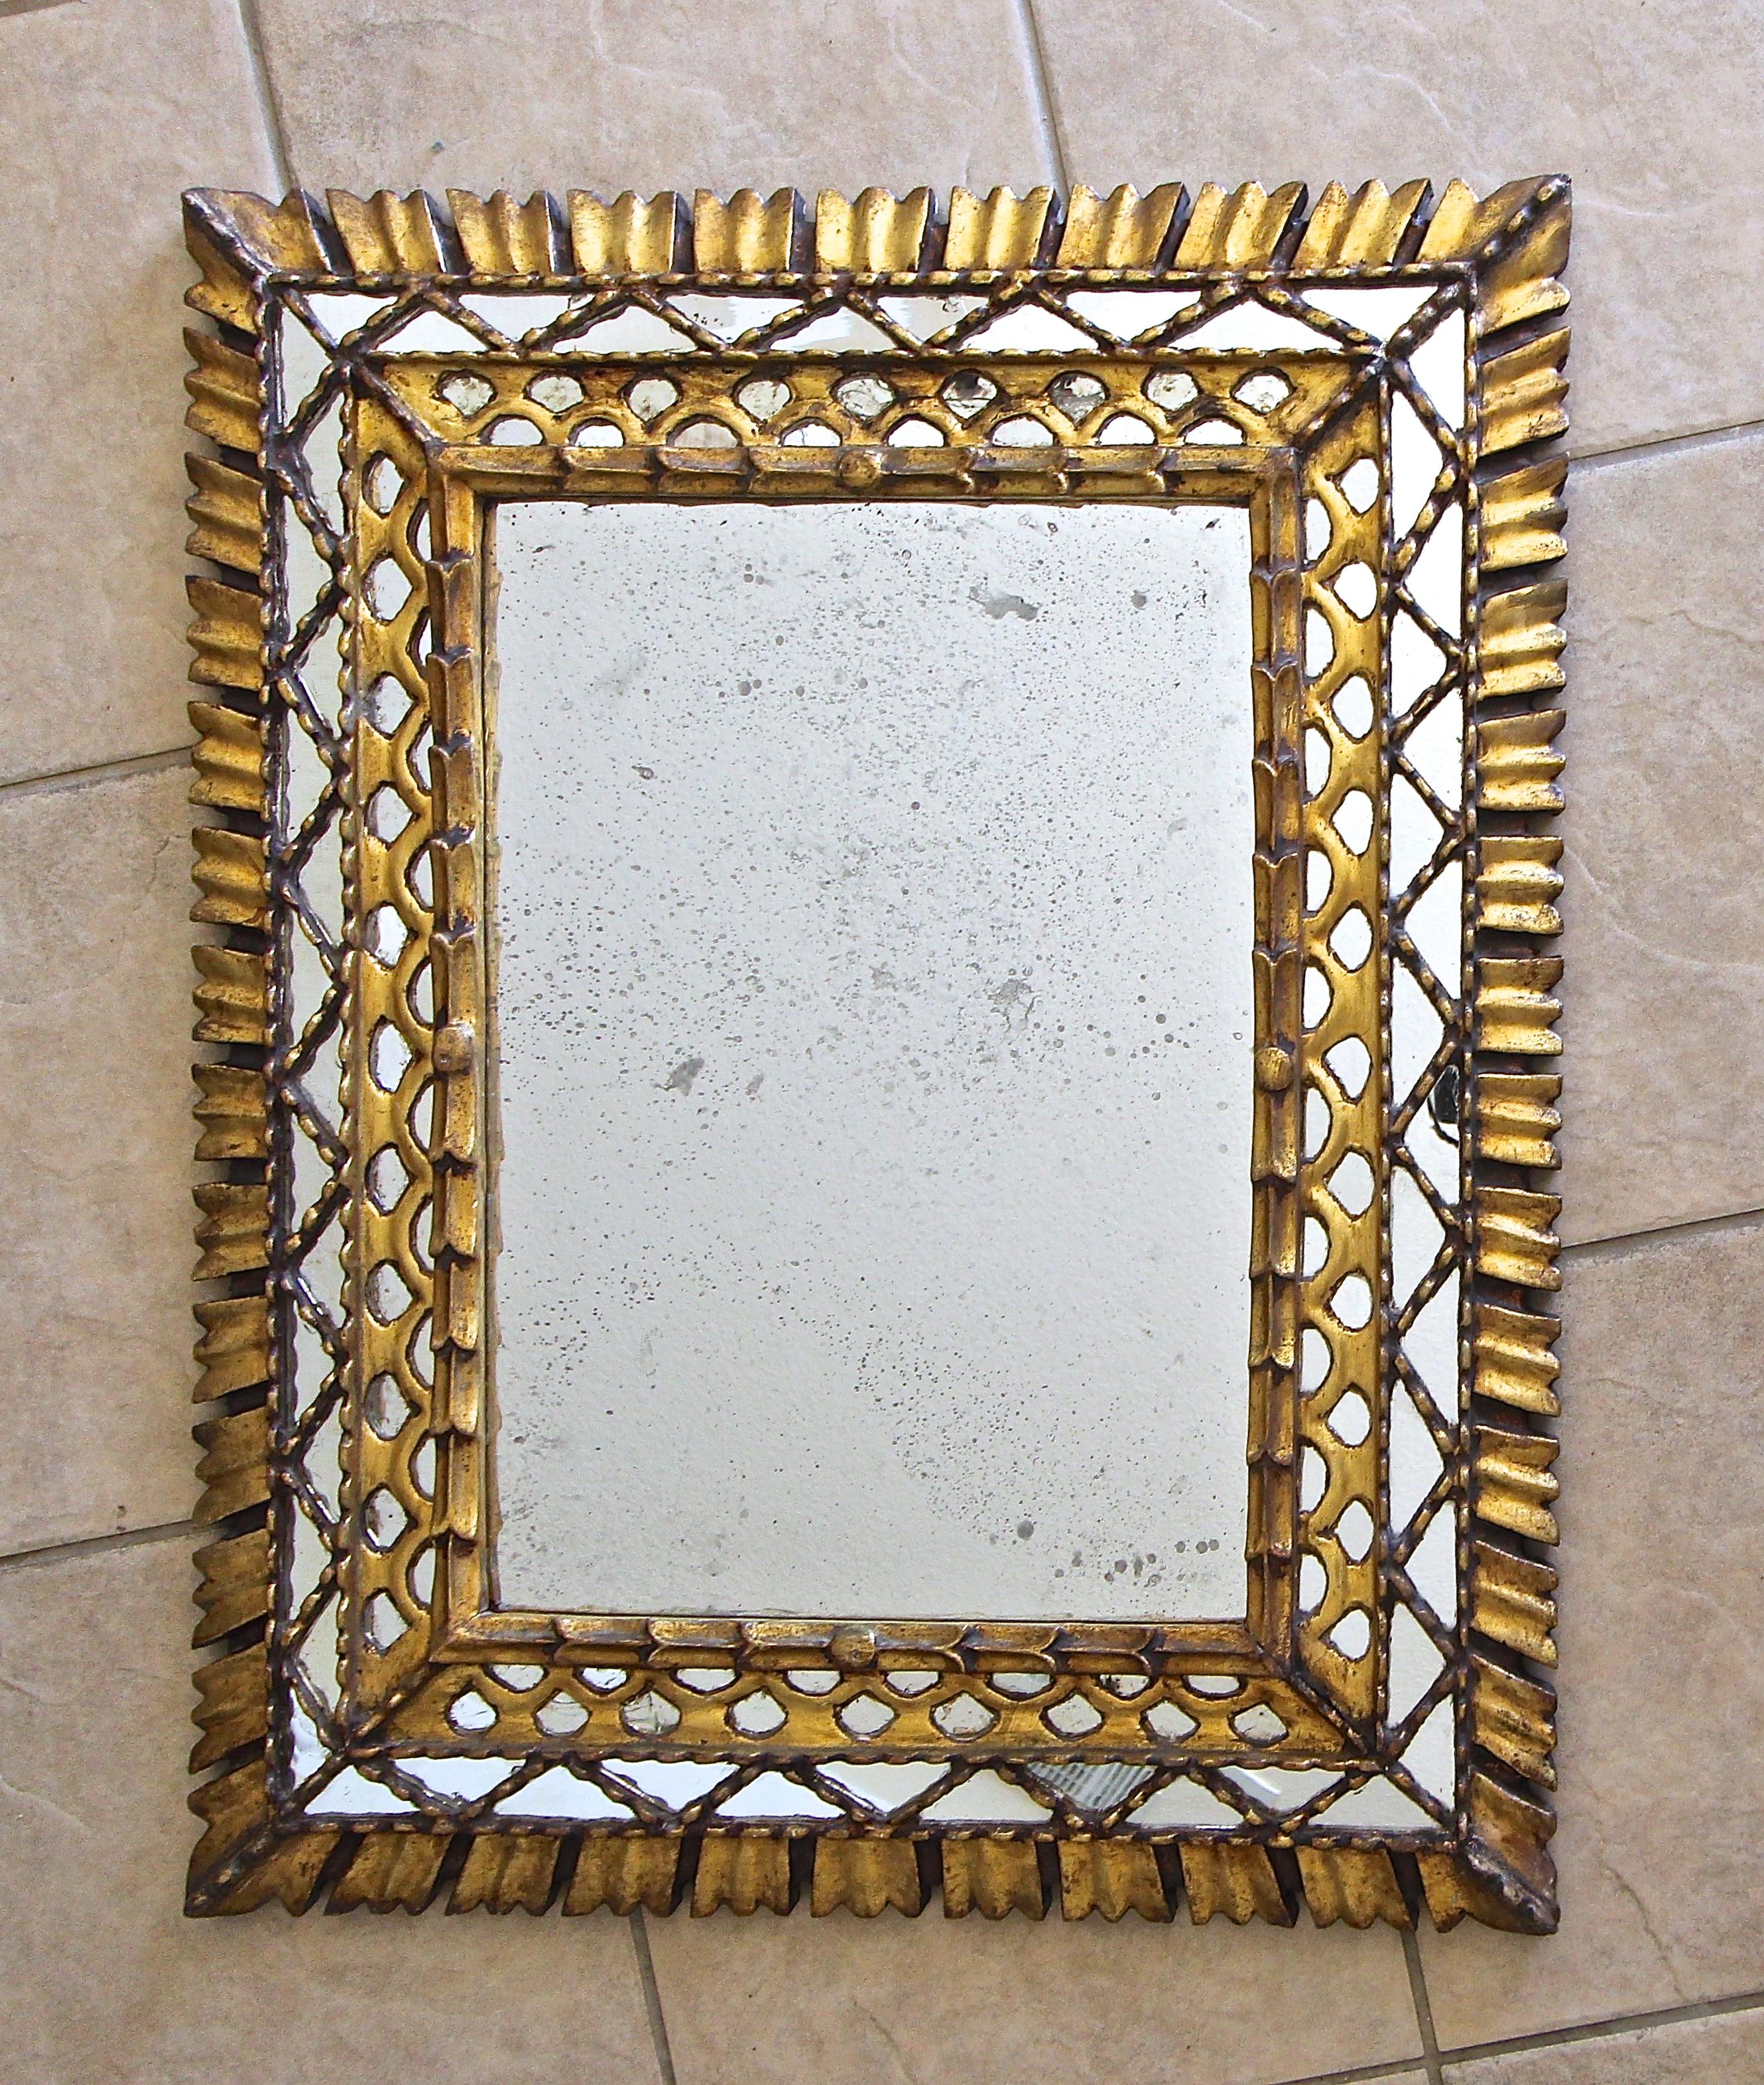 Hand carved rectangle shaped colonial Spanish wall mirror in gold giltwood and gesso finish. There are 3 interior rows of smaller inset mirrors, with carved giltwood outer rays. The larger center mirror is 19